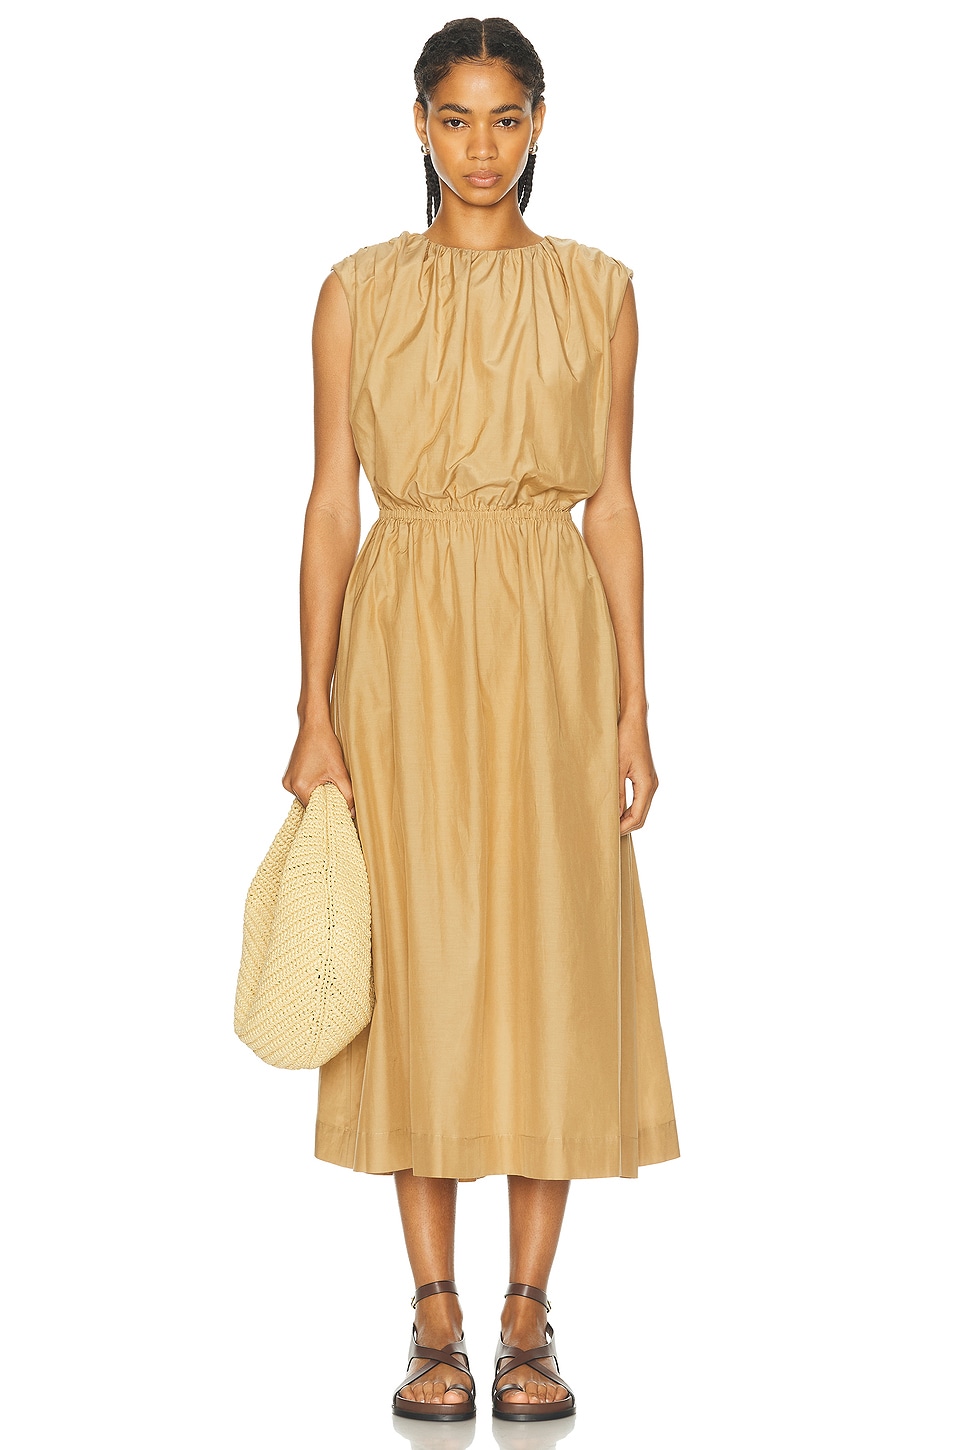 Aphrodite Long Sleeveless Dress With Gathers in Tan